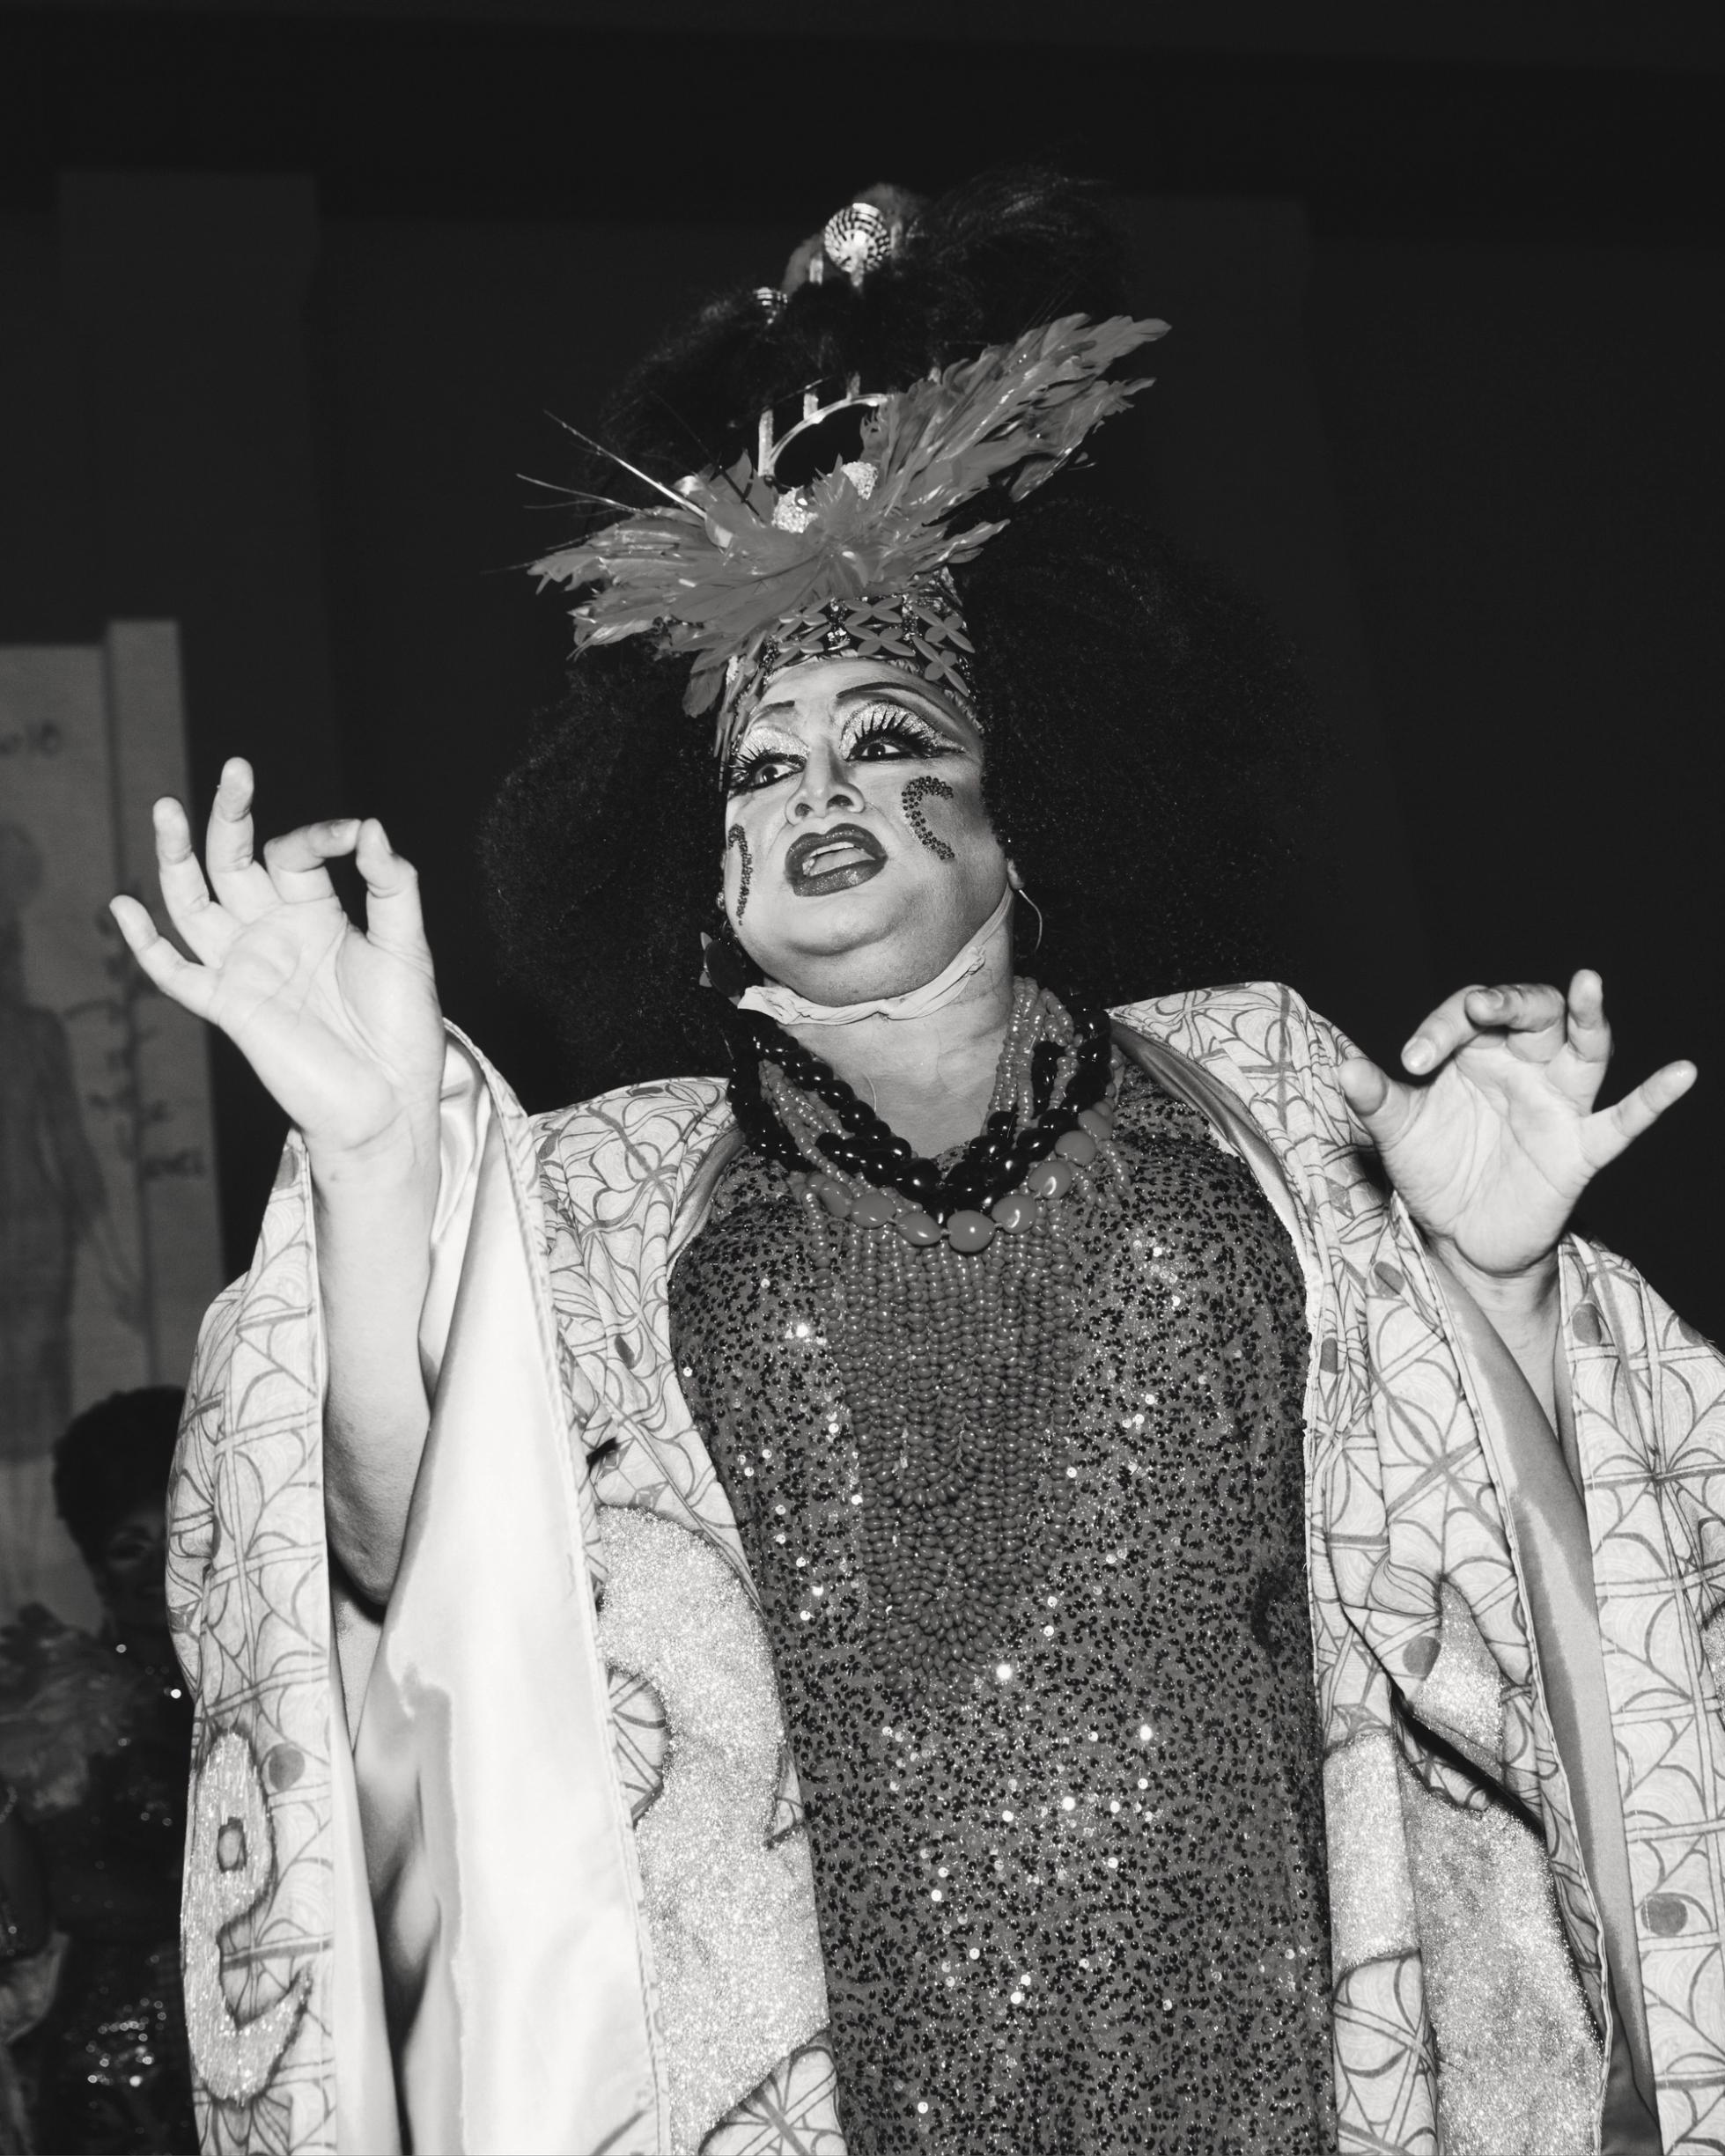 A drag queen performing wearing a patterned kimono, sequined dress and elaborate headdress.